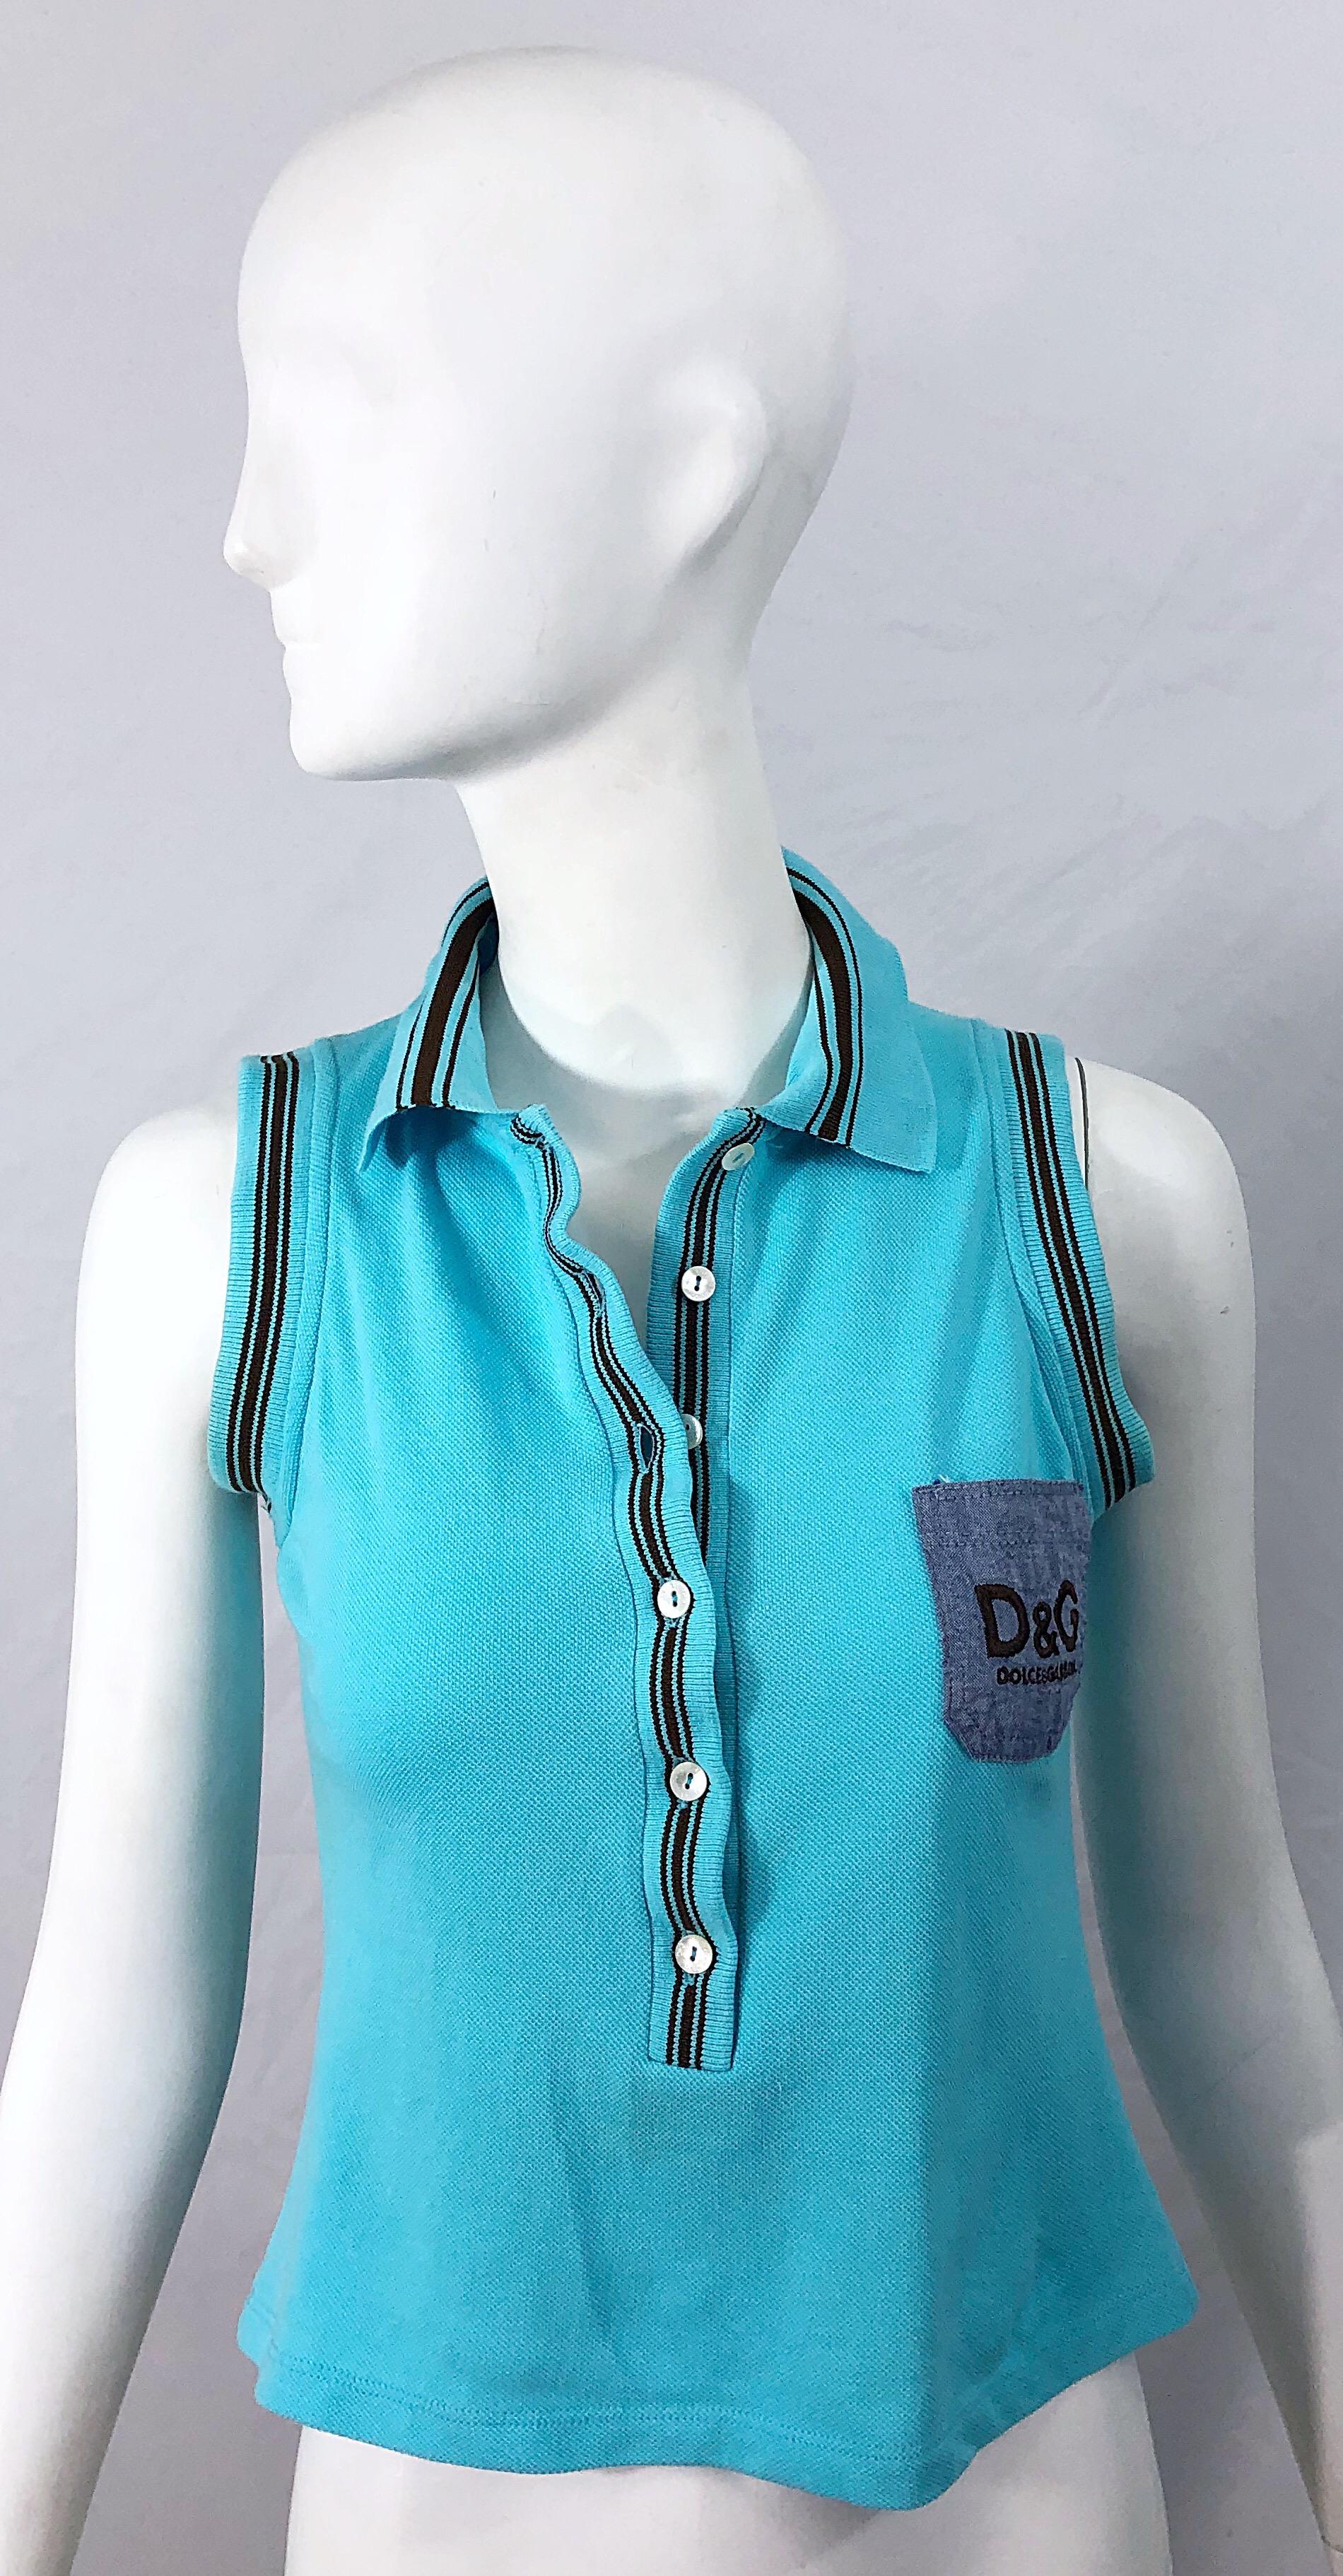 Stylish late 1990s DOLCE AND GABBANA turquoise blue and brown logo knit crop top ! Features a soft cotton knit with a chambray denim pocket patch at left breast with D&G embroidered in brown. Buttons up the front. 
In great condition
Made in